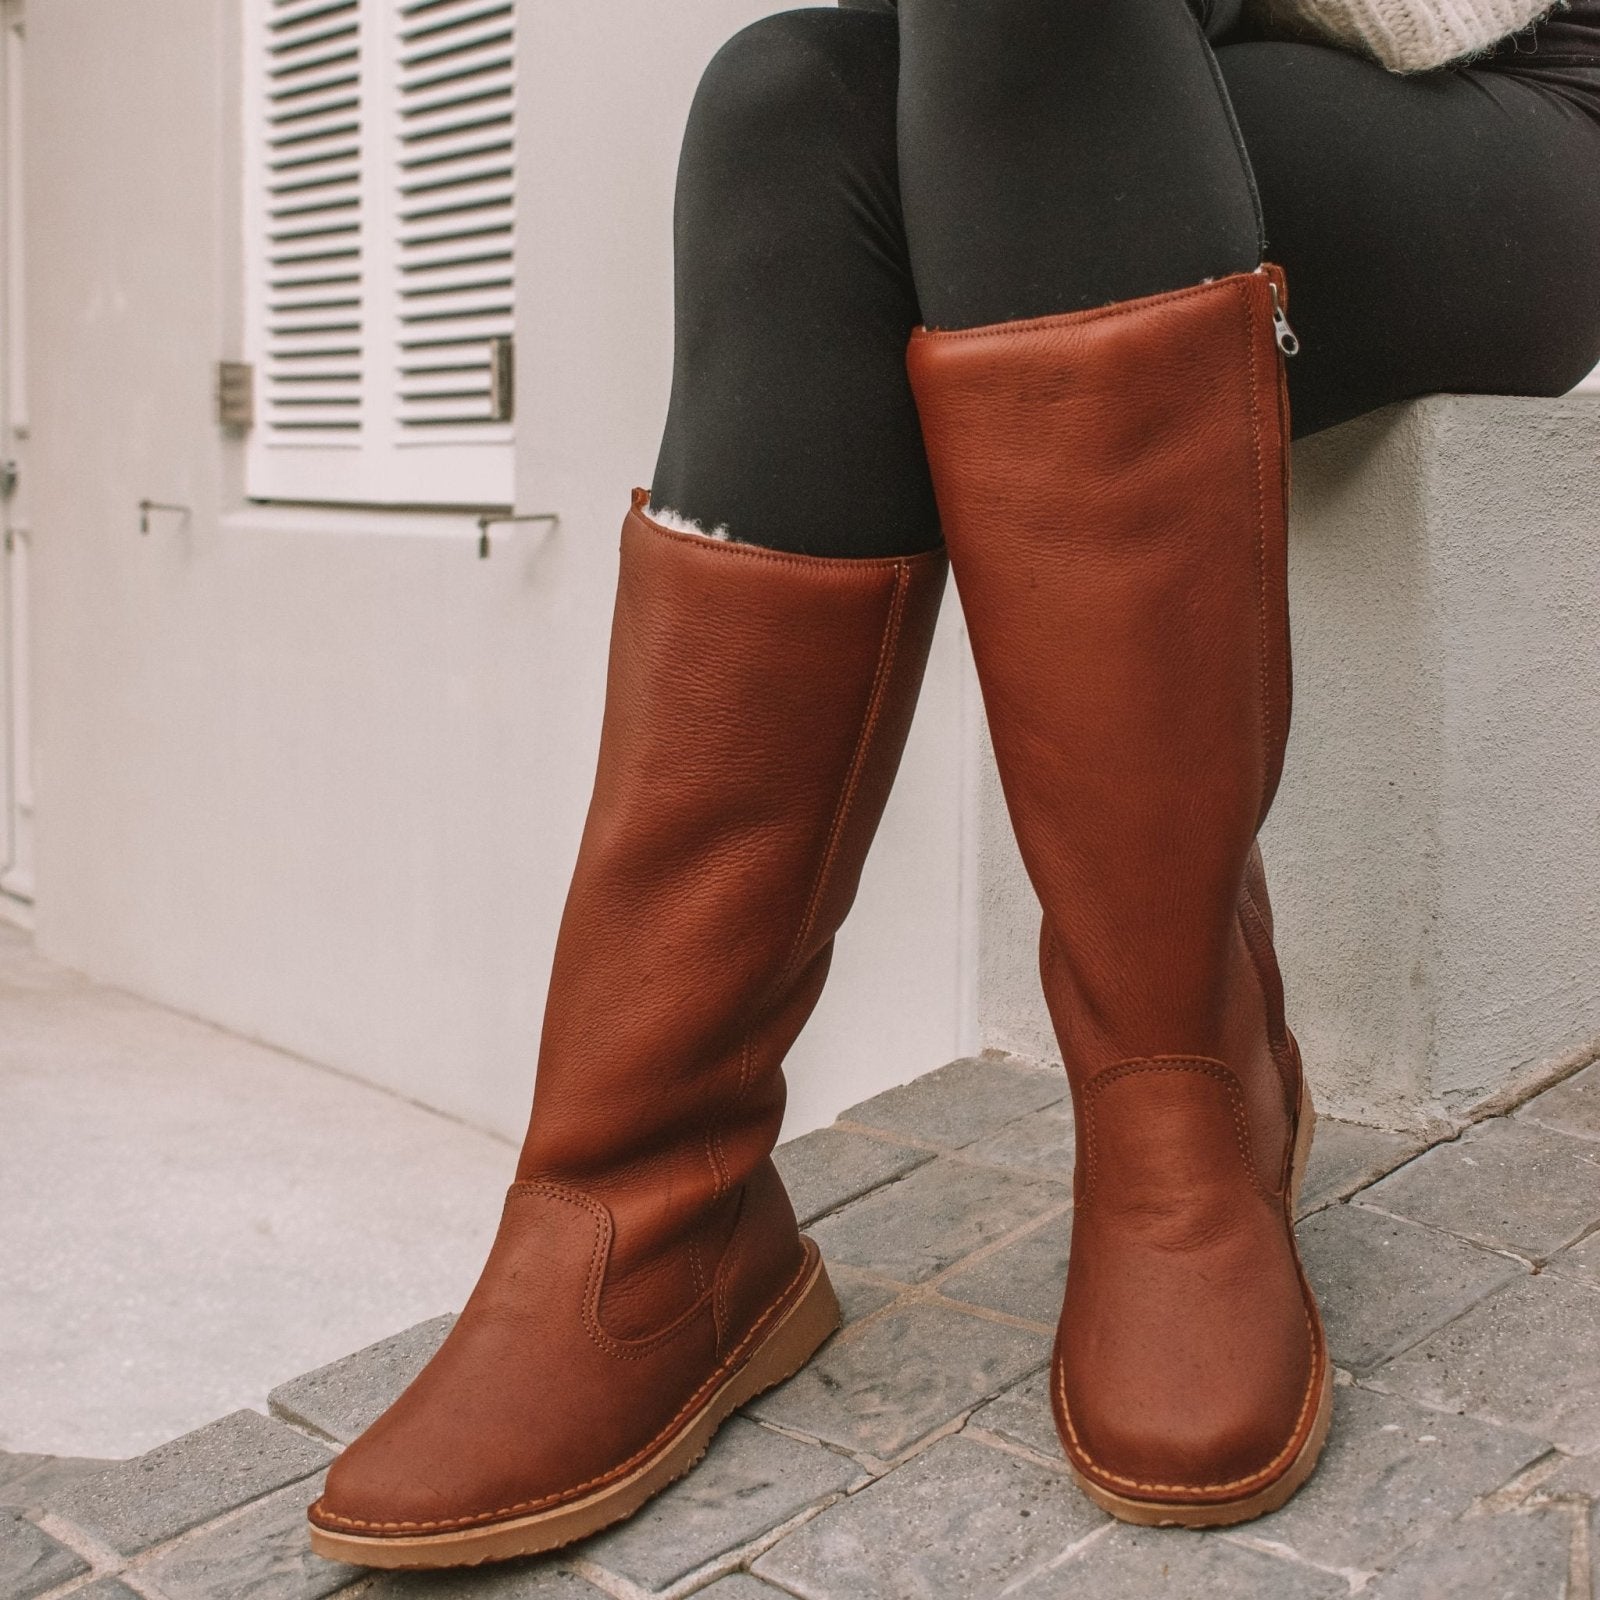 Stella 100% wool-lined premium leather ladies boot - Freestyle SA Proudly local leather boots veldskoens vellies leather shoes suede veldskoens